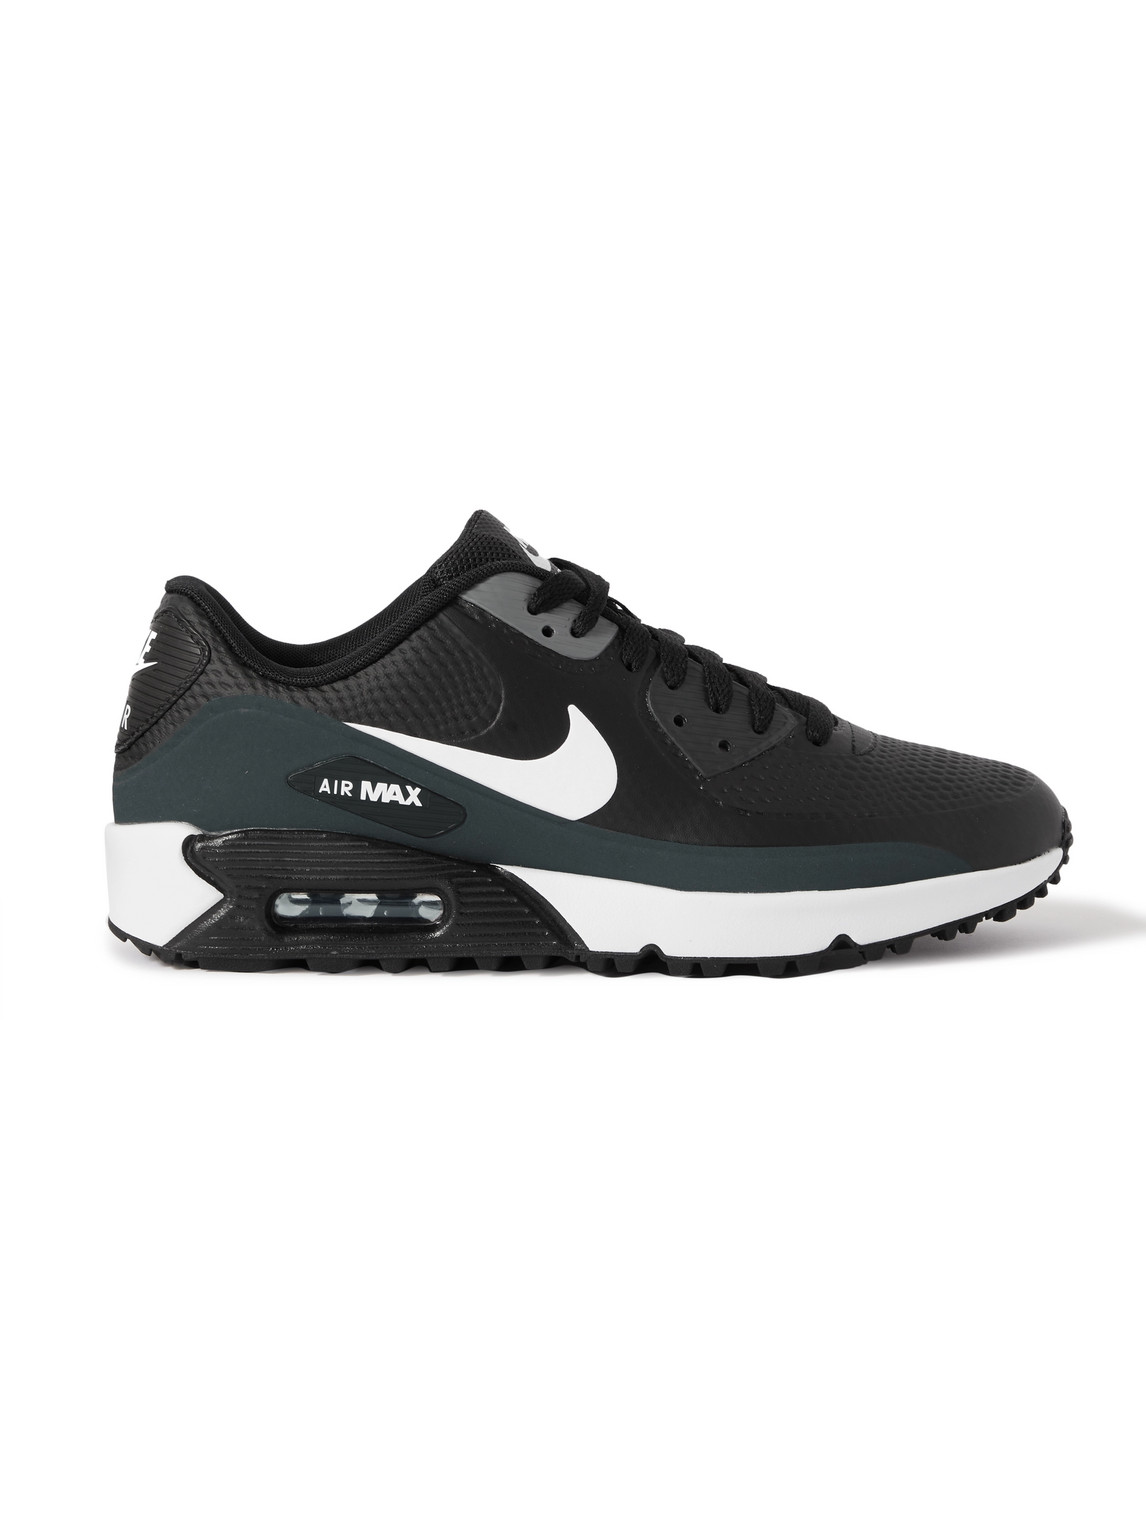 AirMax 90 G Coated-Mesh Golf Shoes